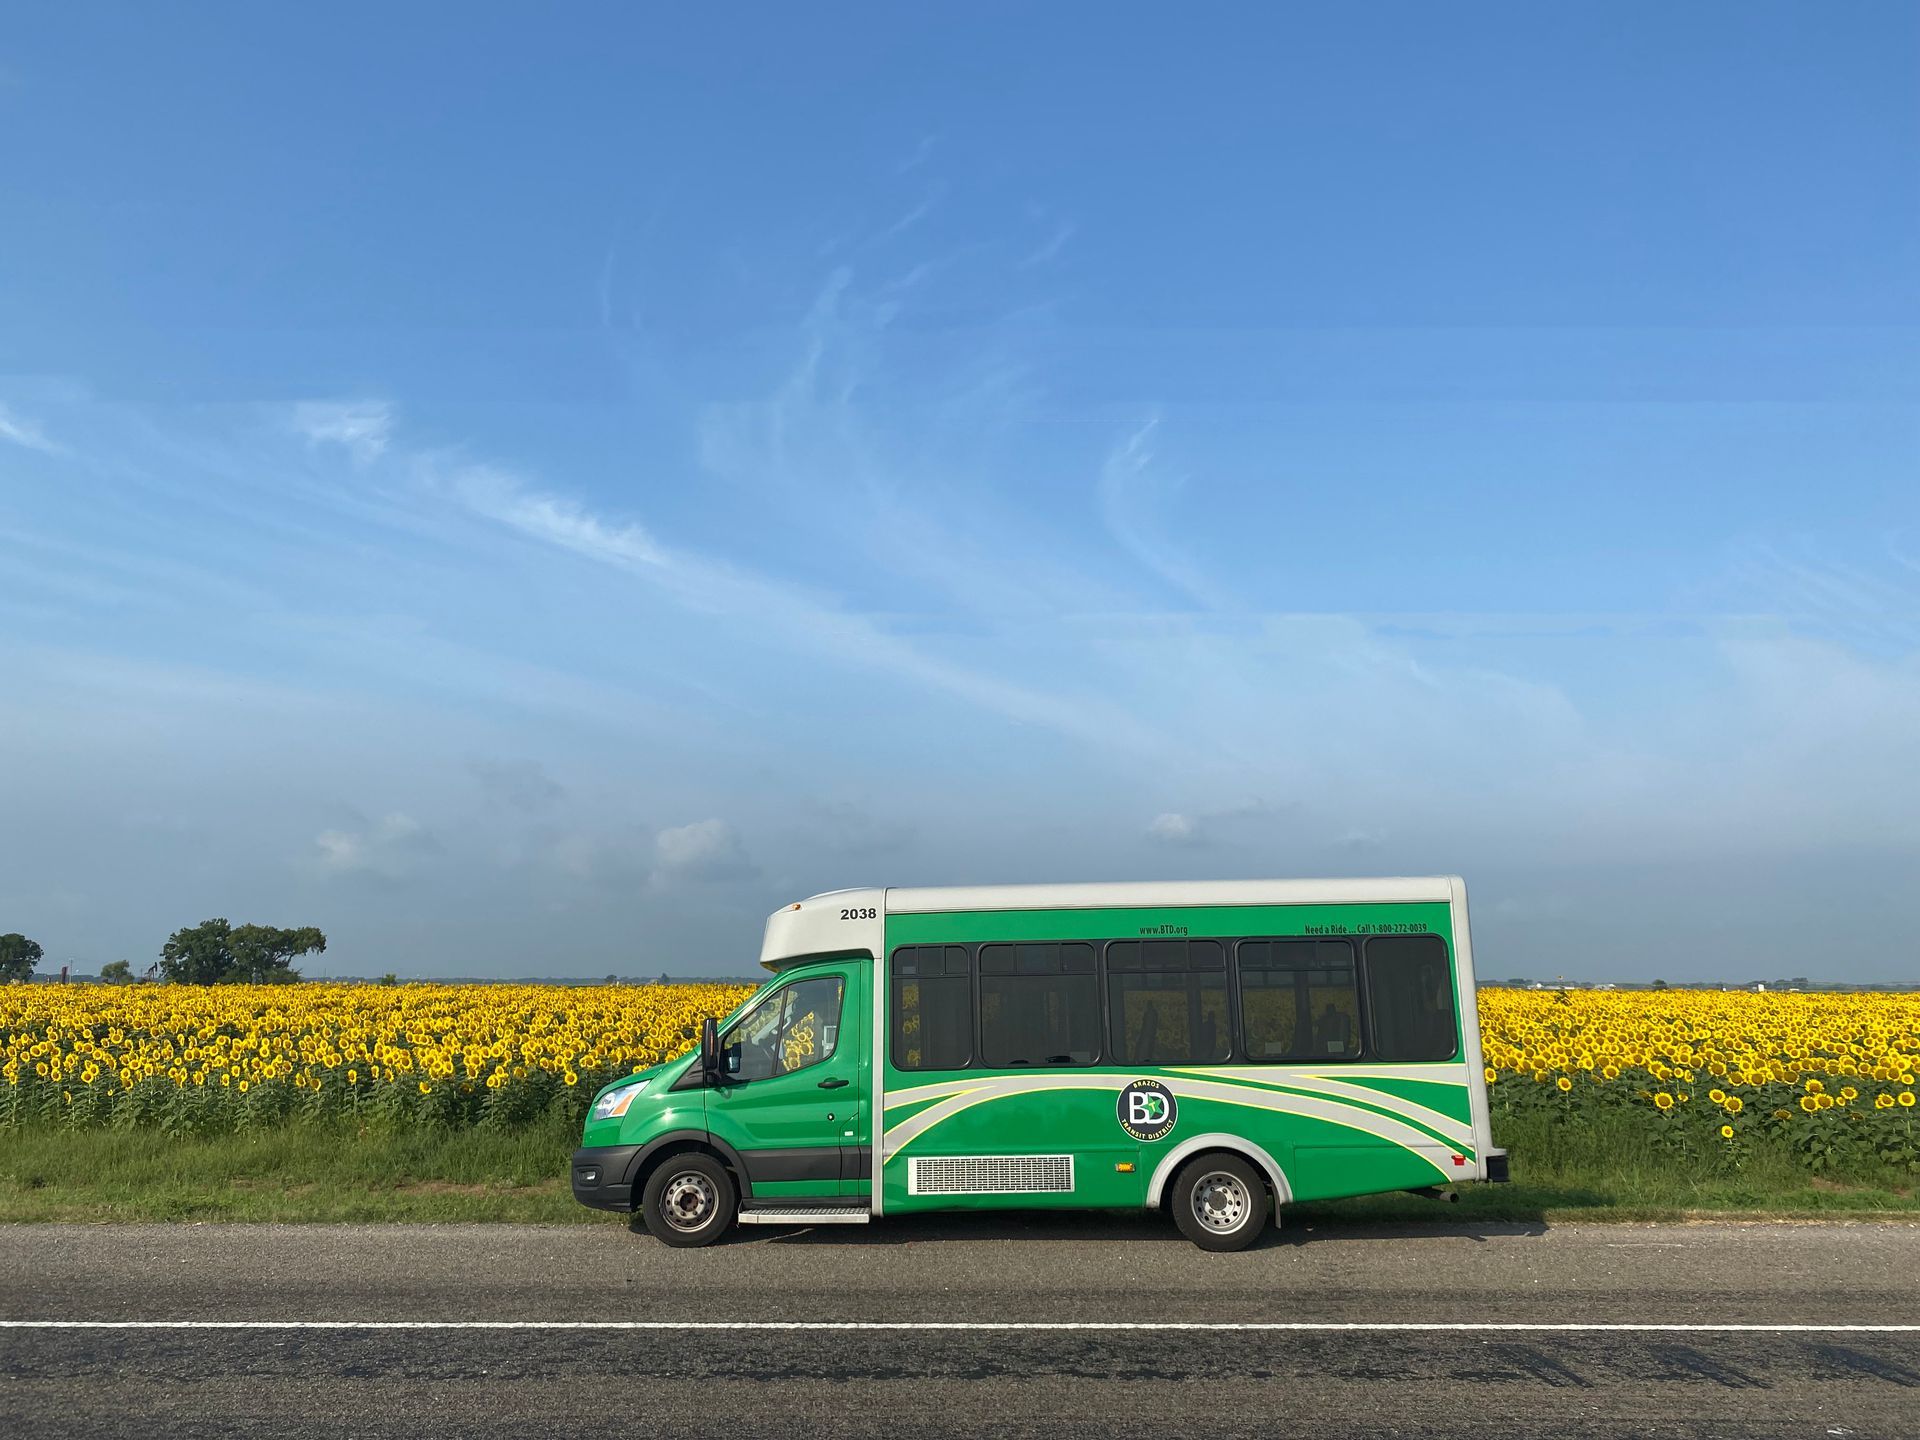 Brazos Transit District bus along road with wildflowers